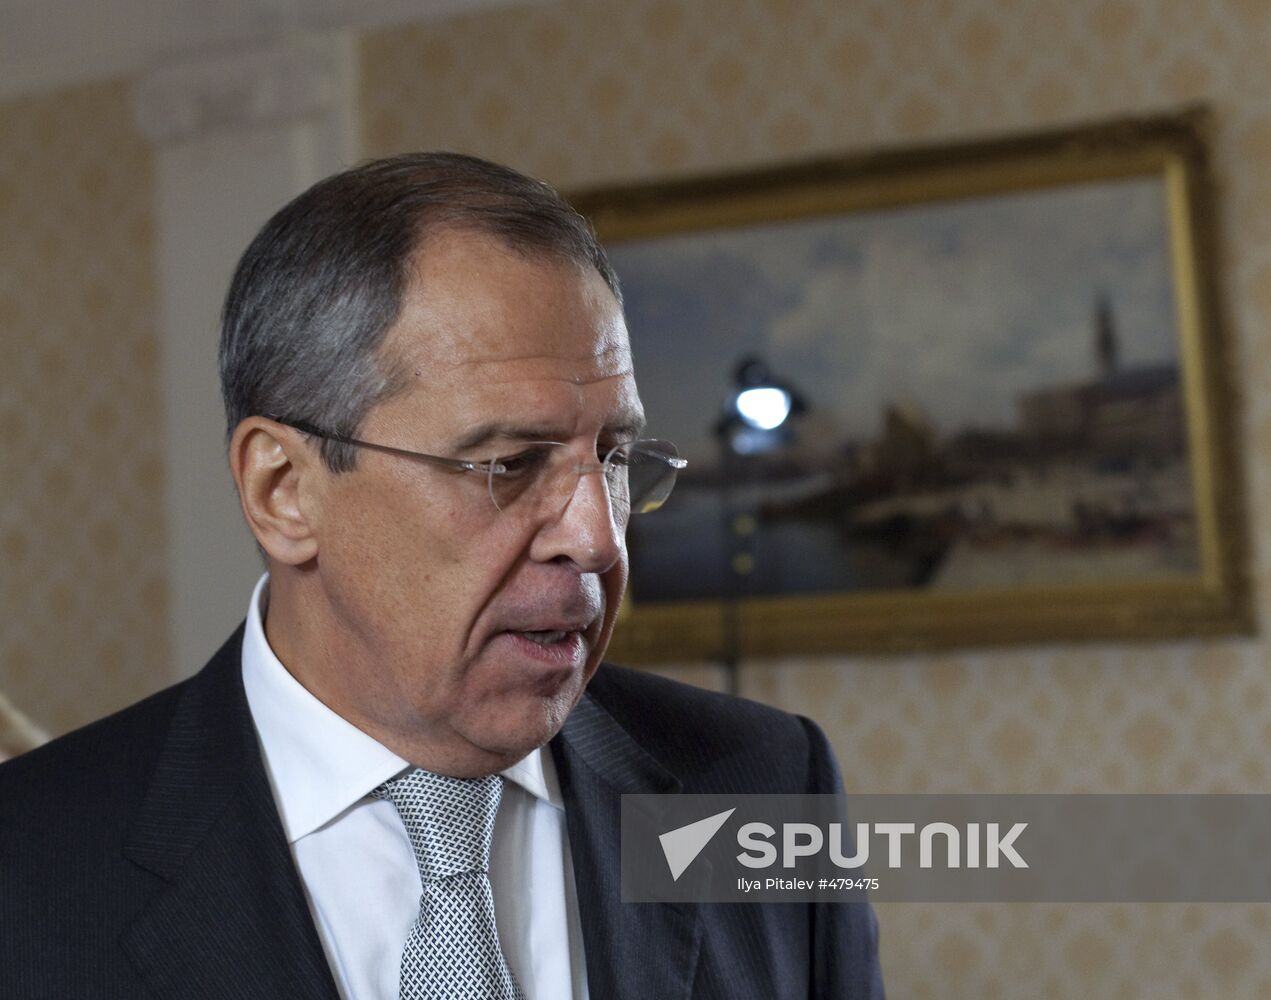 Interview of Russian Foreign Minister Sergei Lavrov